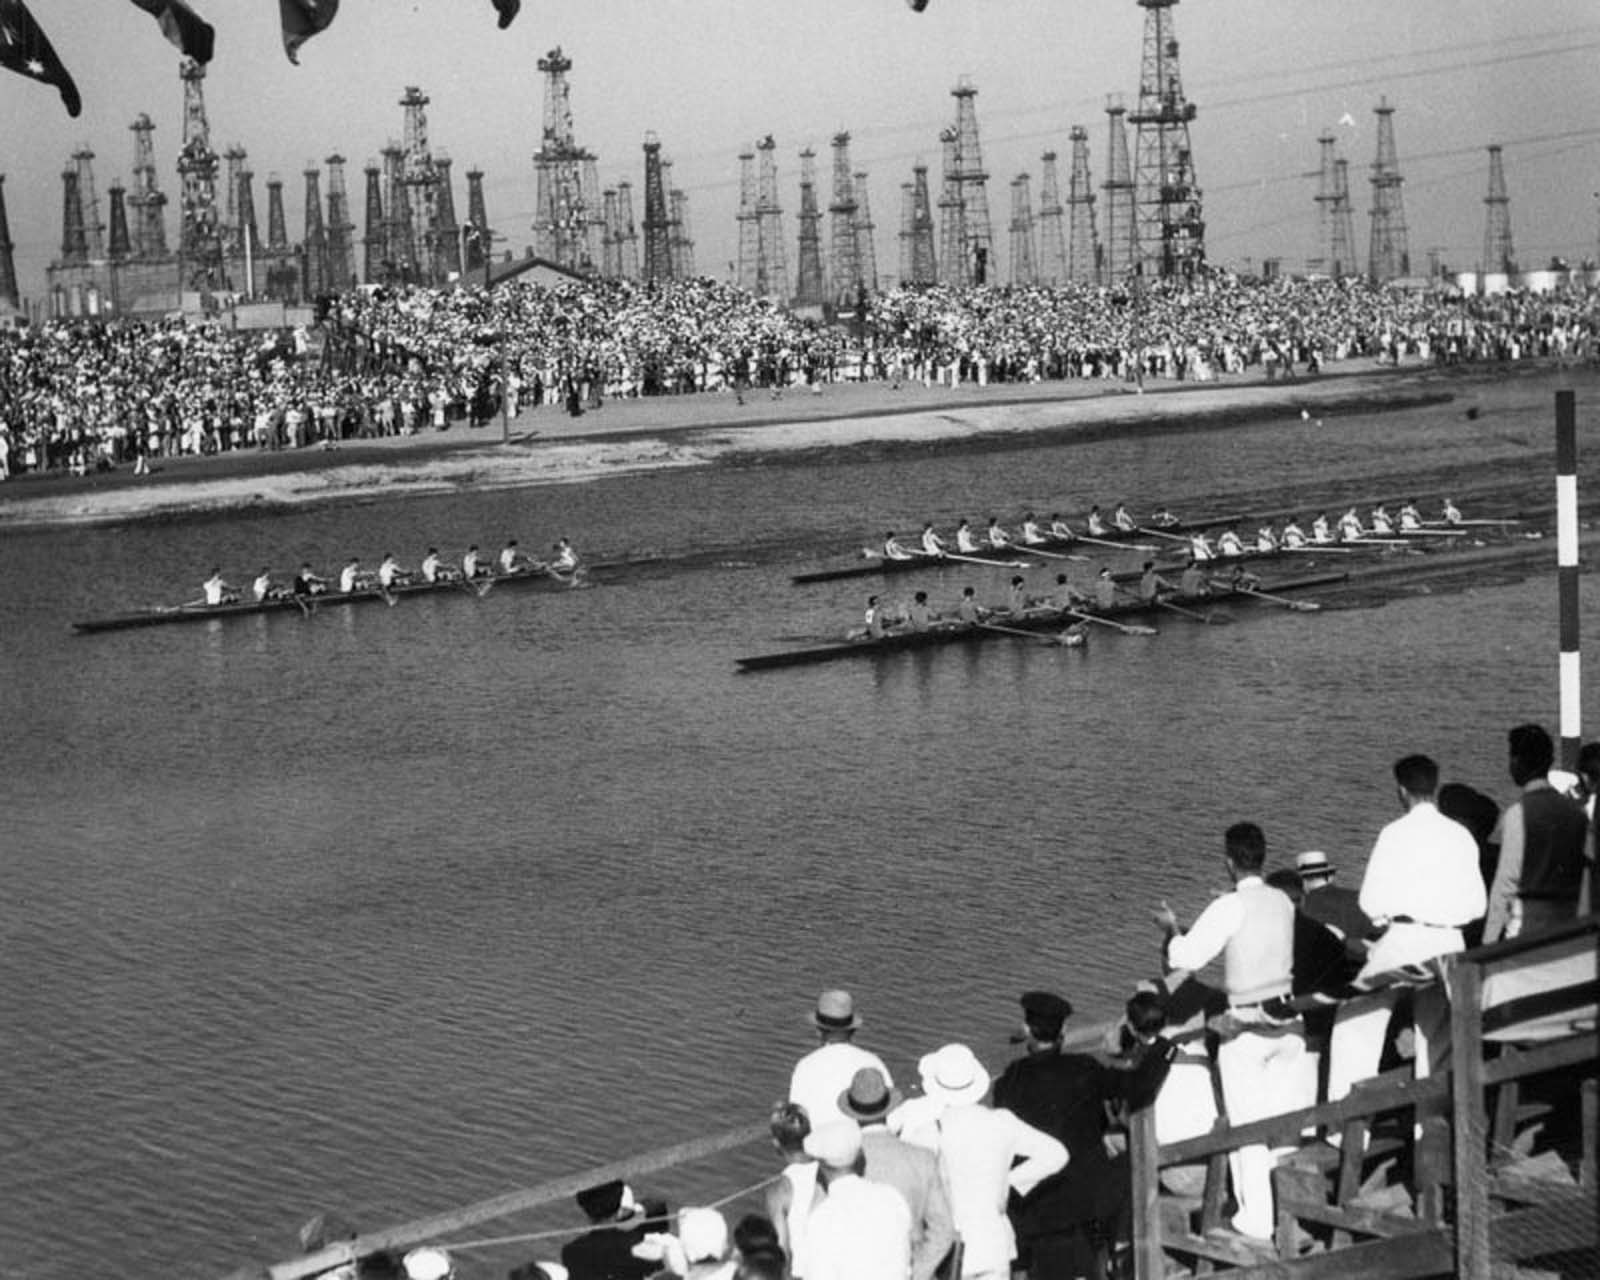 Four boats race in the Long Beach Marine Stadium during the 1932 Olympic Games, 1932